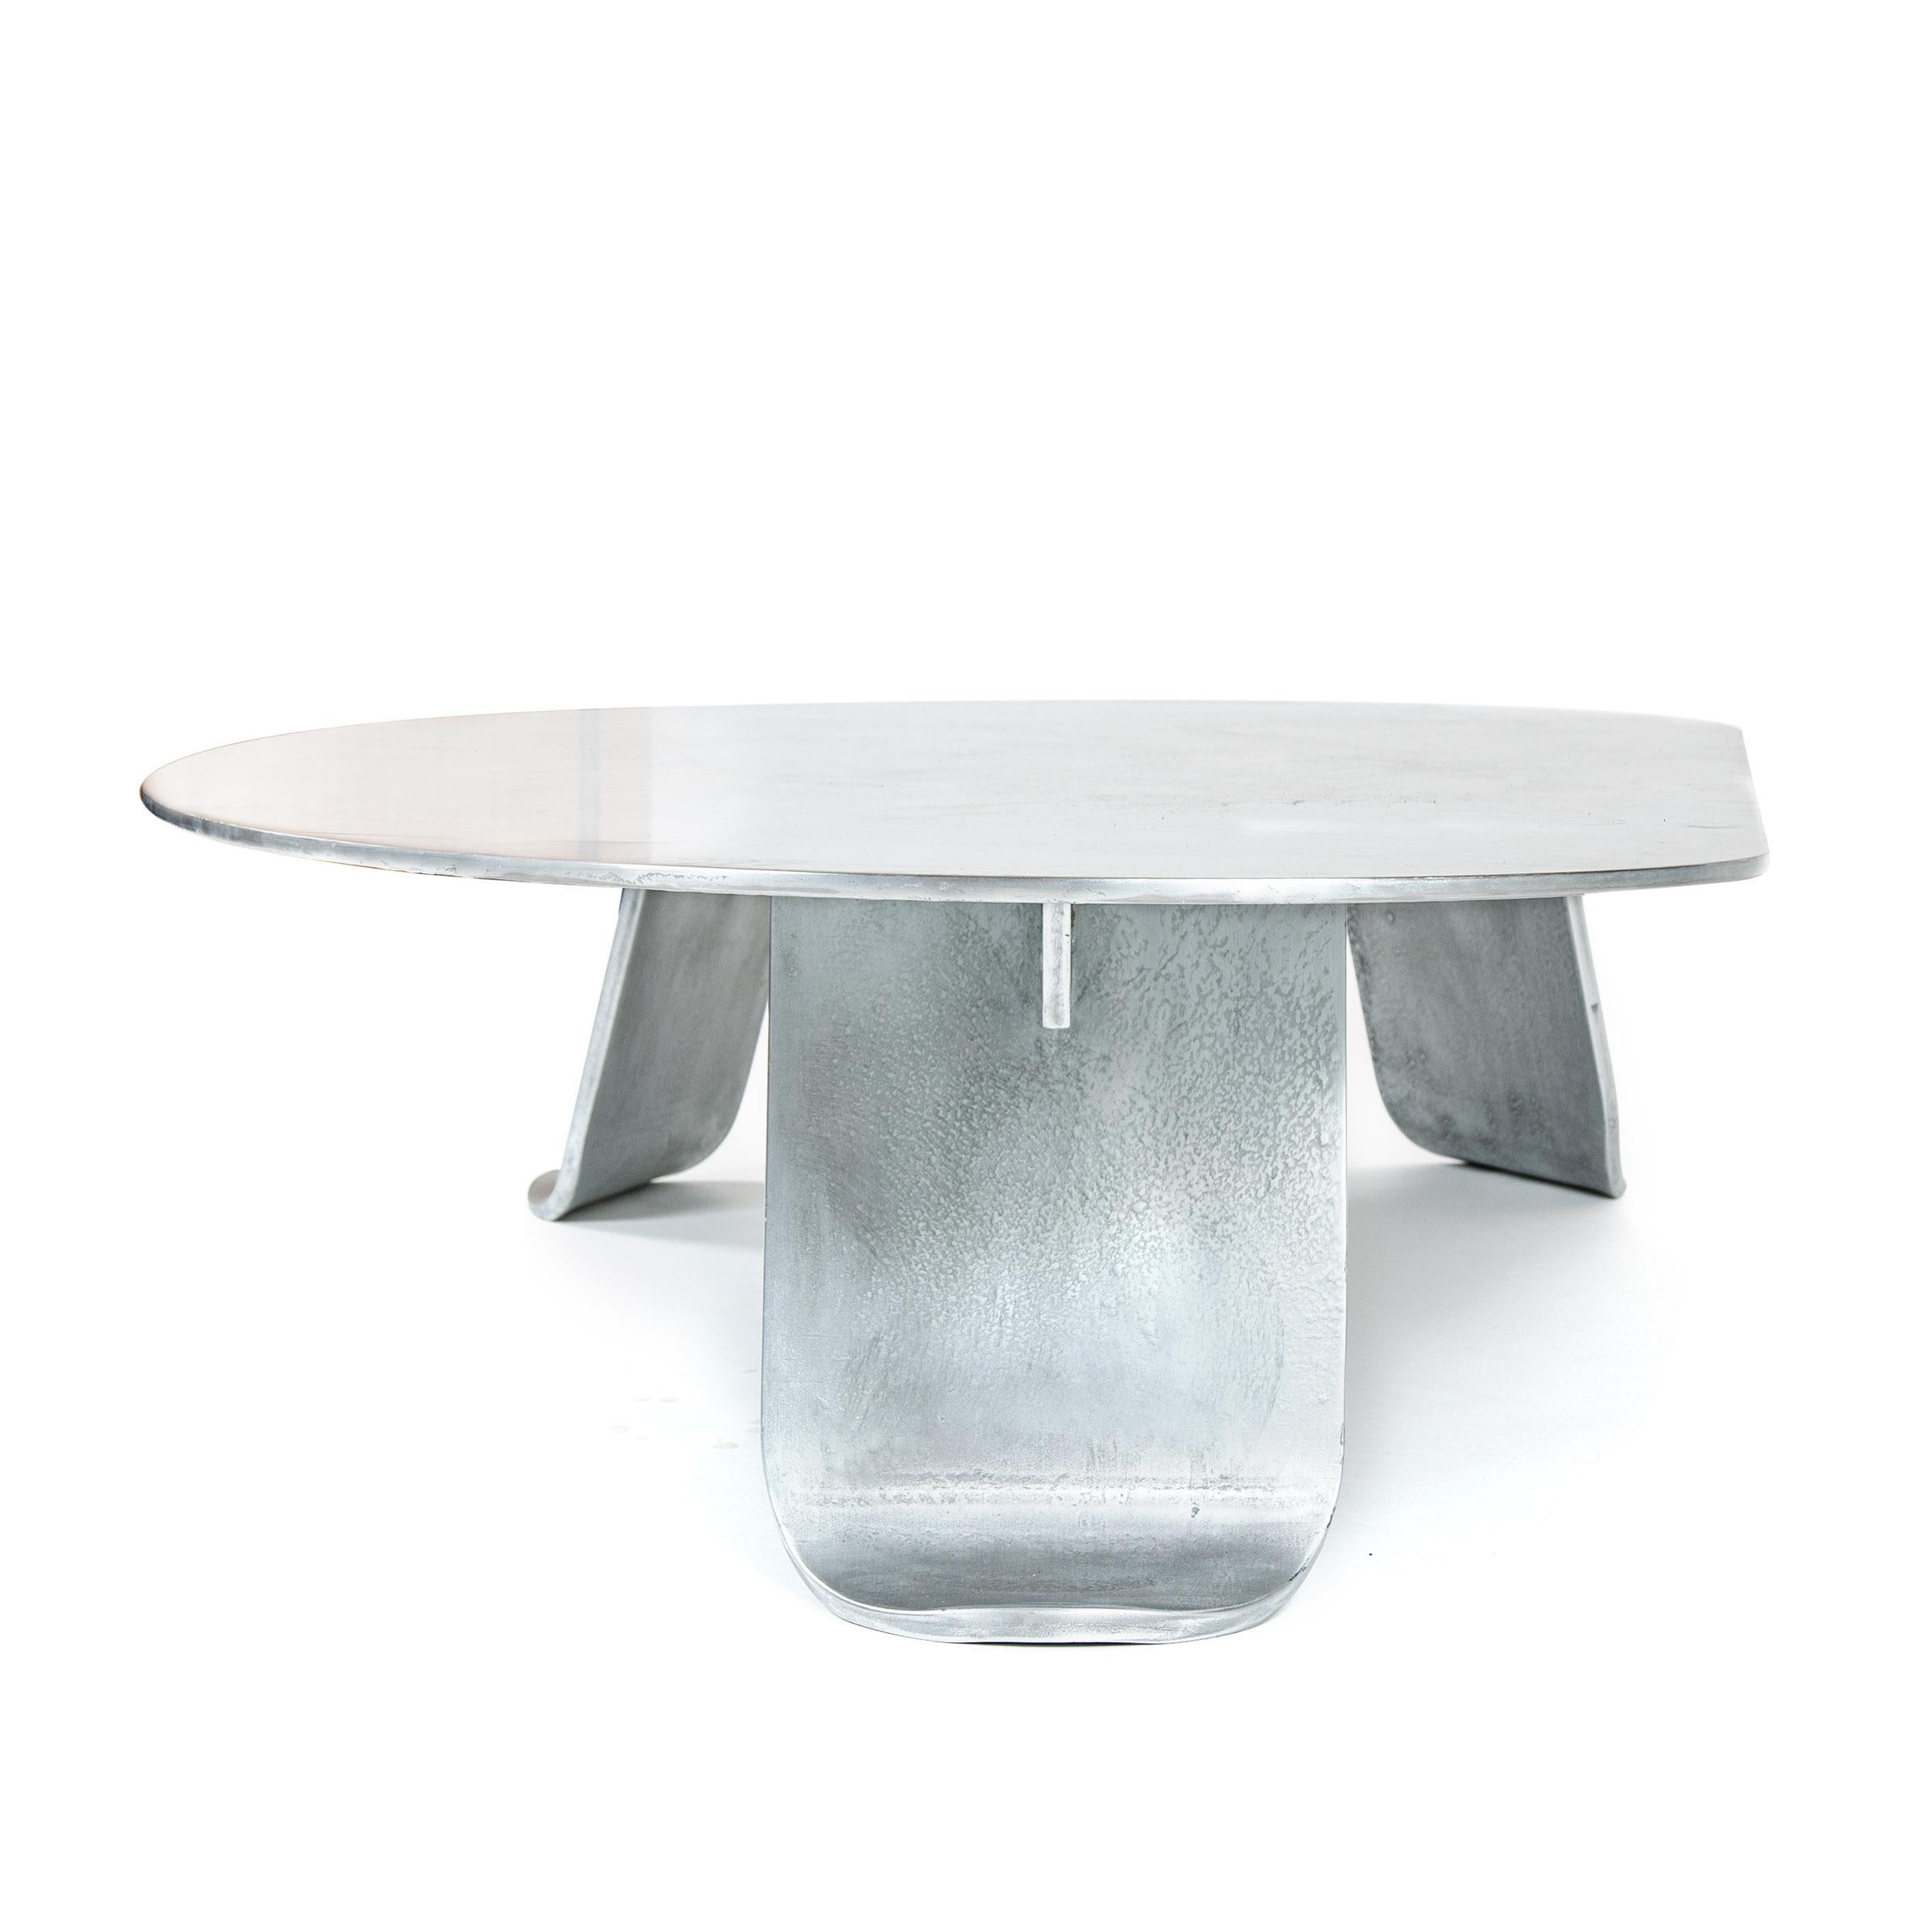 WYETH Chrysalis Table No. 1 in Steel with Hot Zinc Finish In New Condition For Sale In Sagaponack, NY